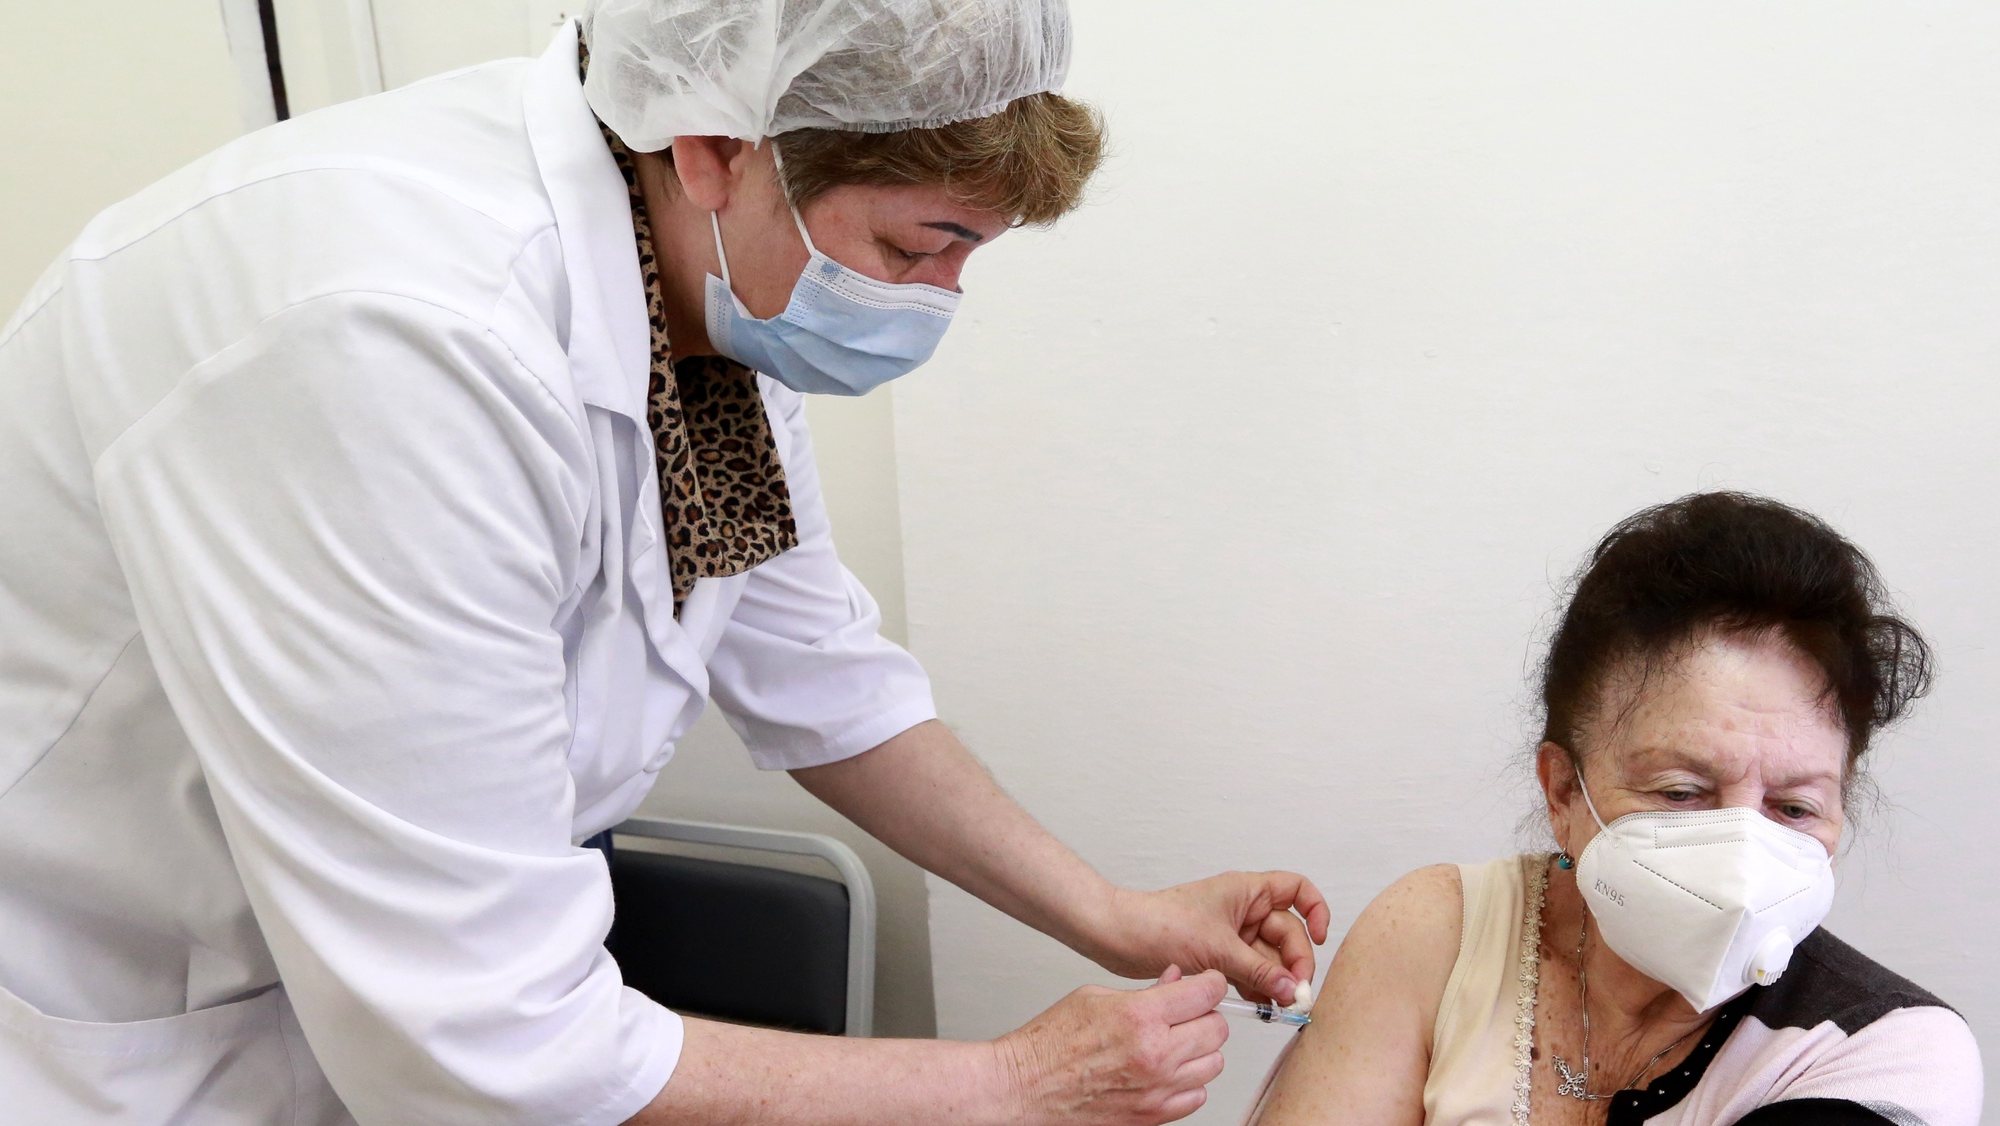 epa09163111 A Kyrgyz woman receives a jab of the Russian Sputnik V vaccine, at the Family Medicine Center No. 6, in Bishkek, Kyrgyzstan, 27 April 2021. The Kyrgyz authorities received 20,000 doses of the Sputnik V Covid-19 vaccines as assistance from Russia.  EPA/IGOR KOVALENKO